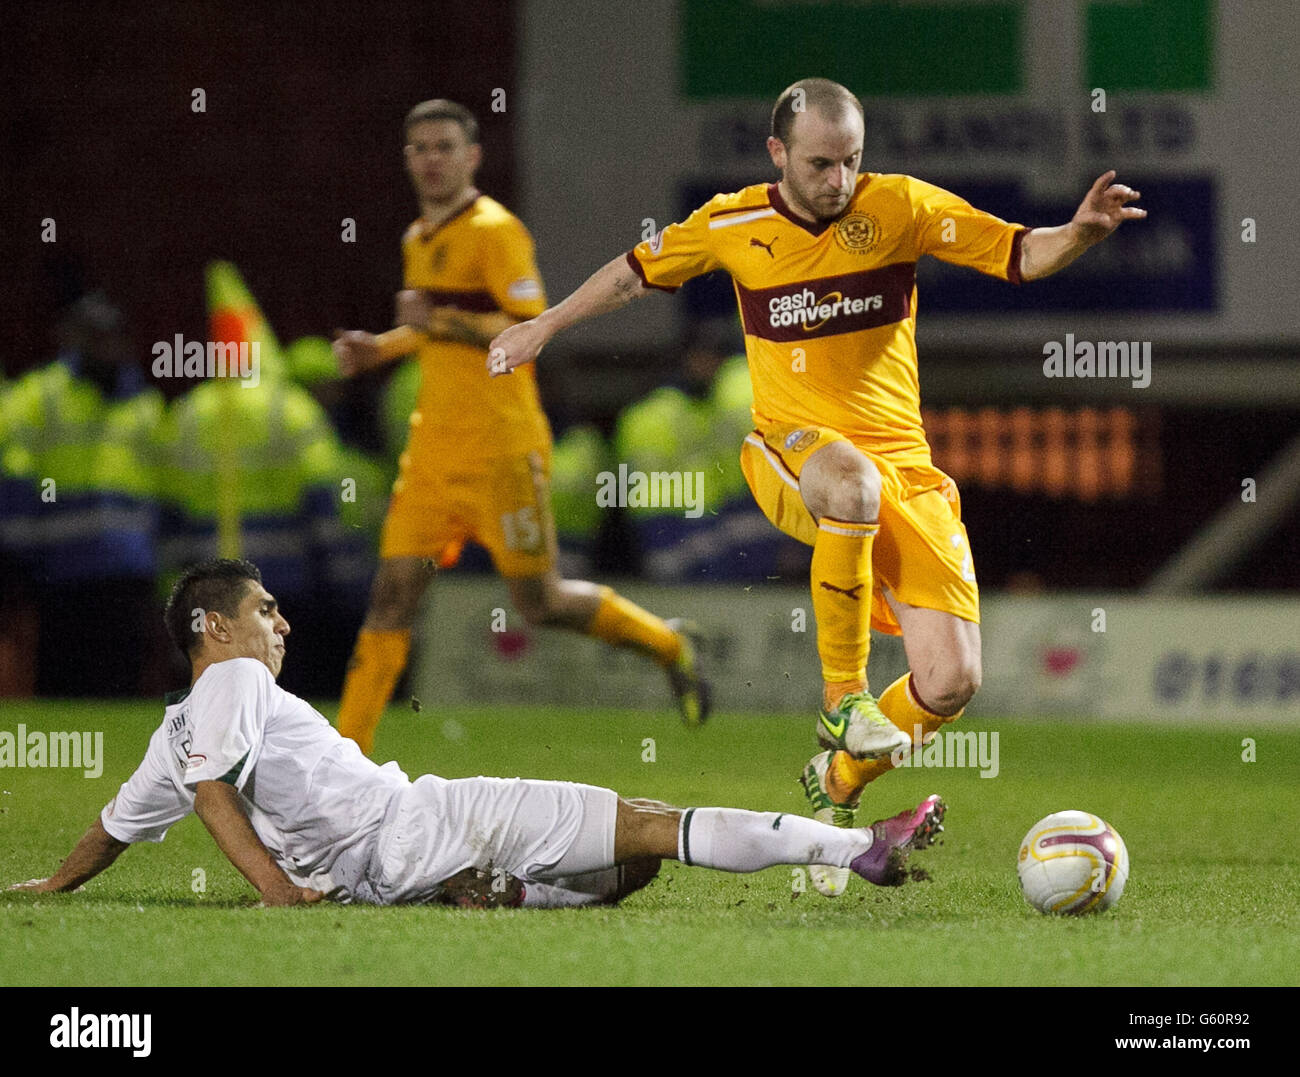 Motherwell's James McFadden is tackled by Hibernian's Jorge Claros during the Clydesdale Bank Scottish Premier League match at Fir Park, Motherwell. Stock Photo